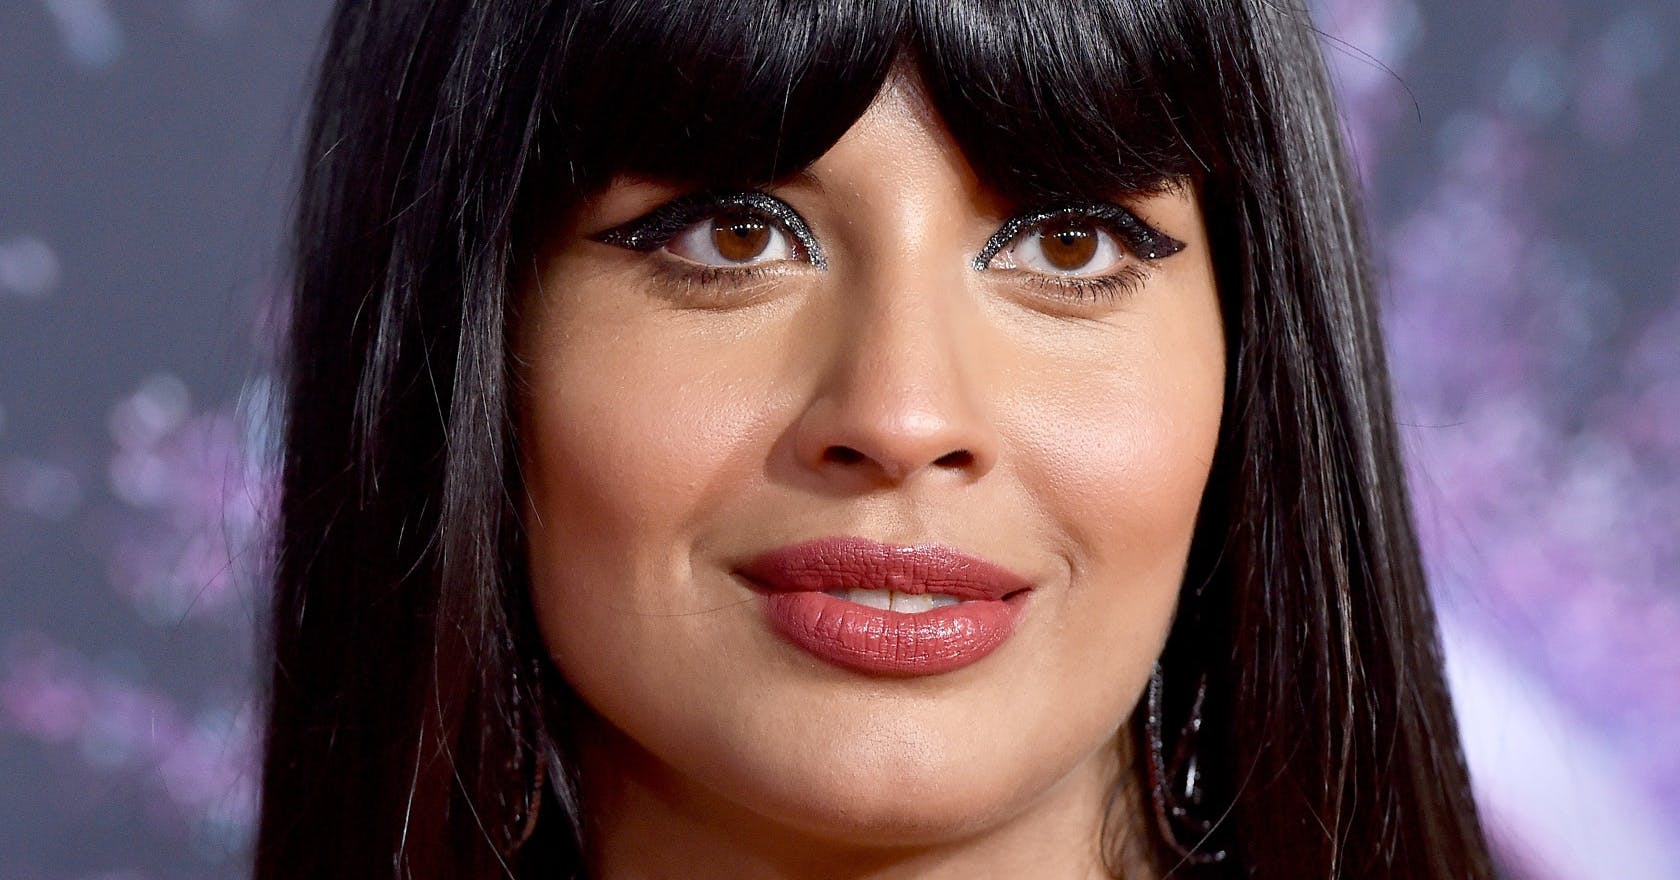 Jameela Jamil urges followers to save the NHS in powerful ... - 1680 x 880 jpeg 140kB